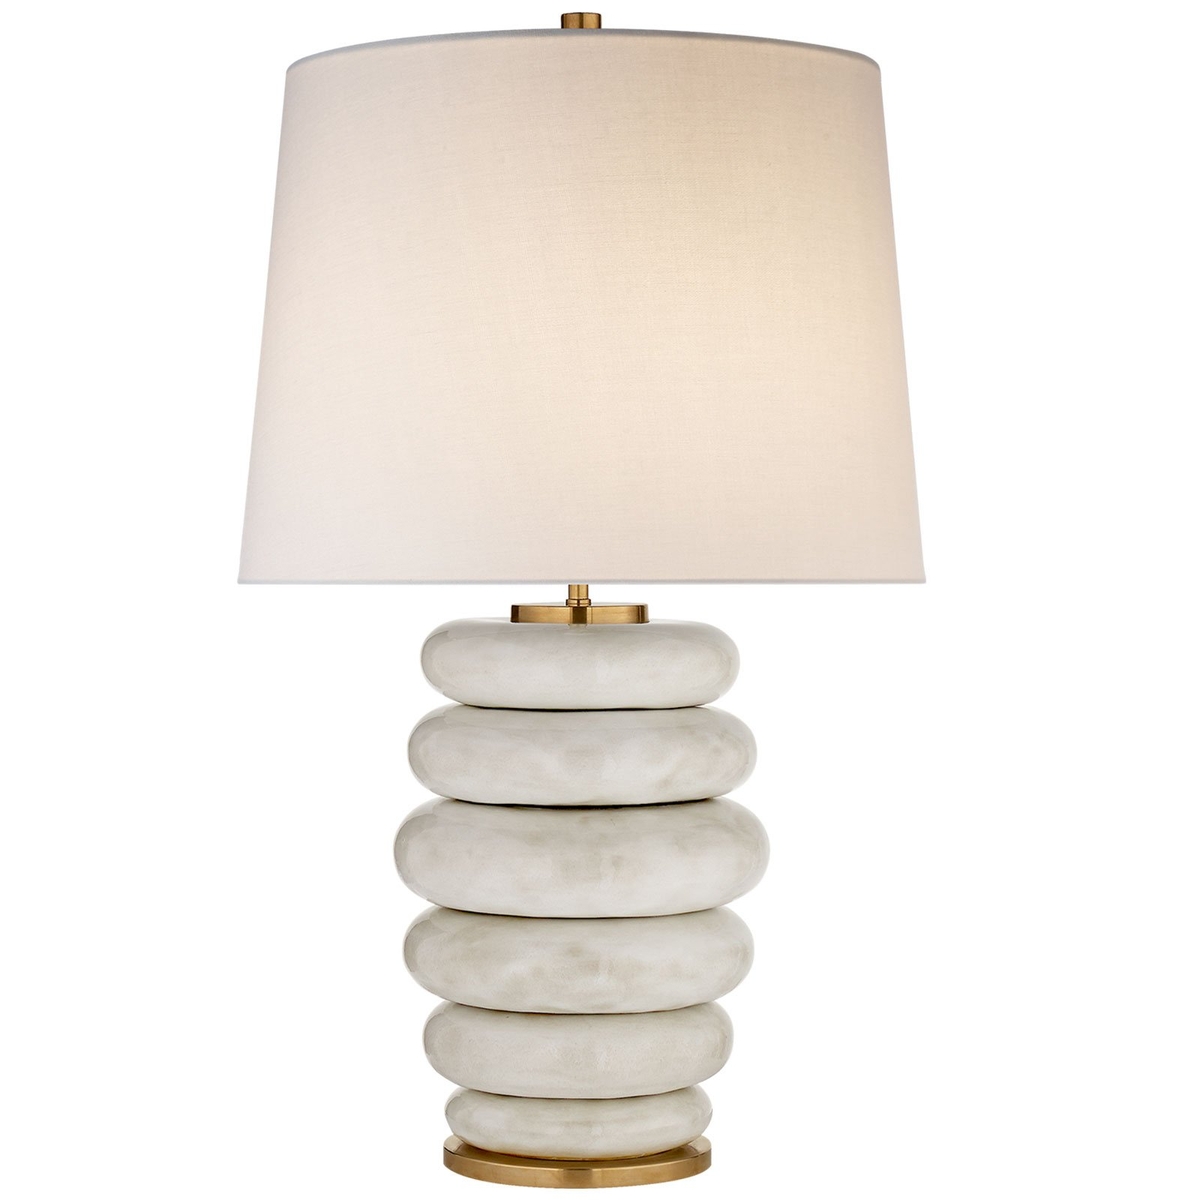 Antiqued White Phoebe Table Lamp